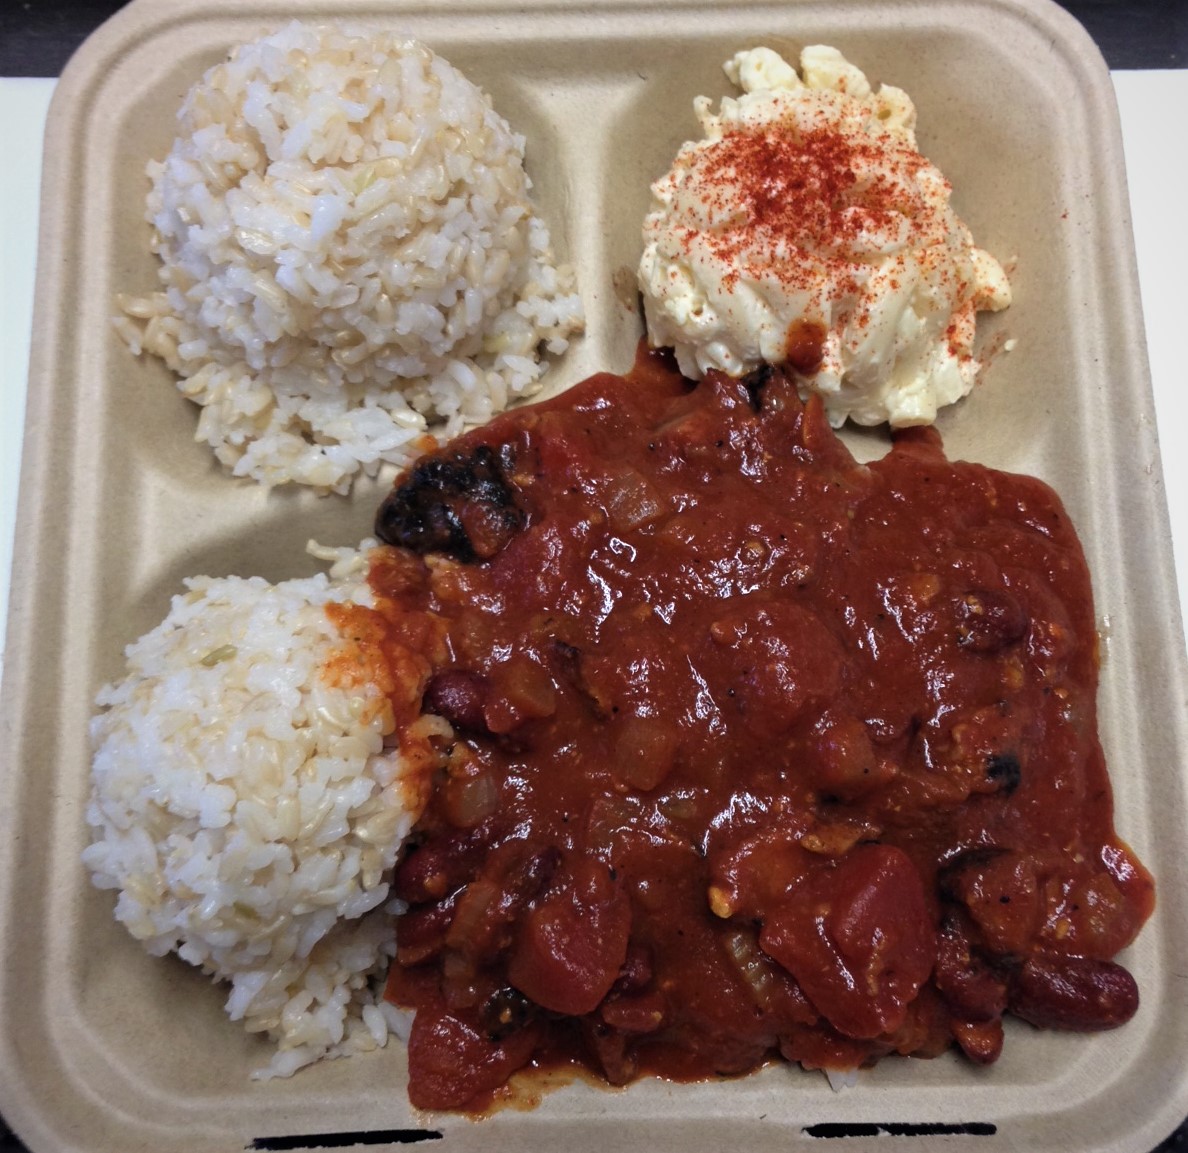 Guava Smoked Chili Plate Lunch